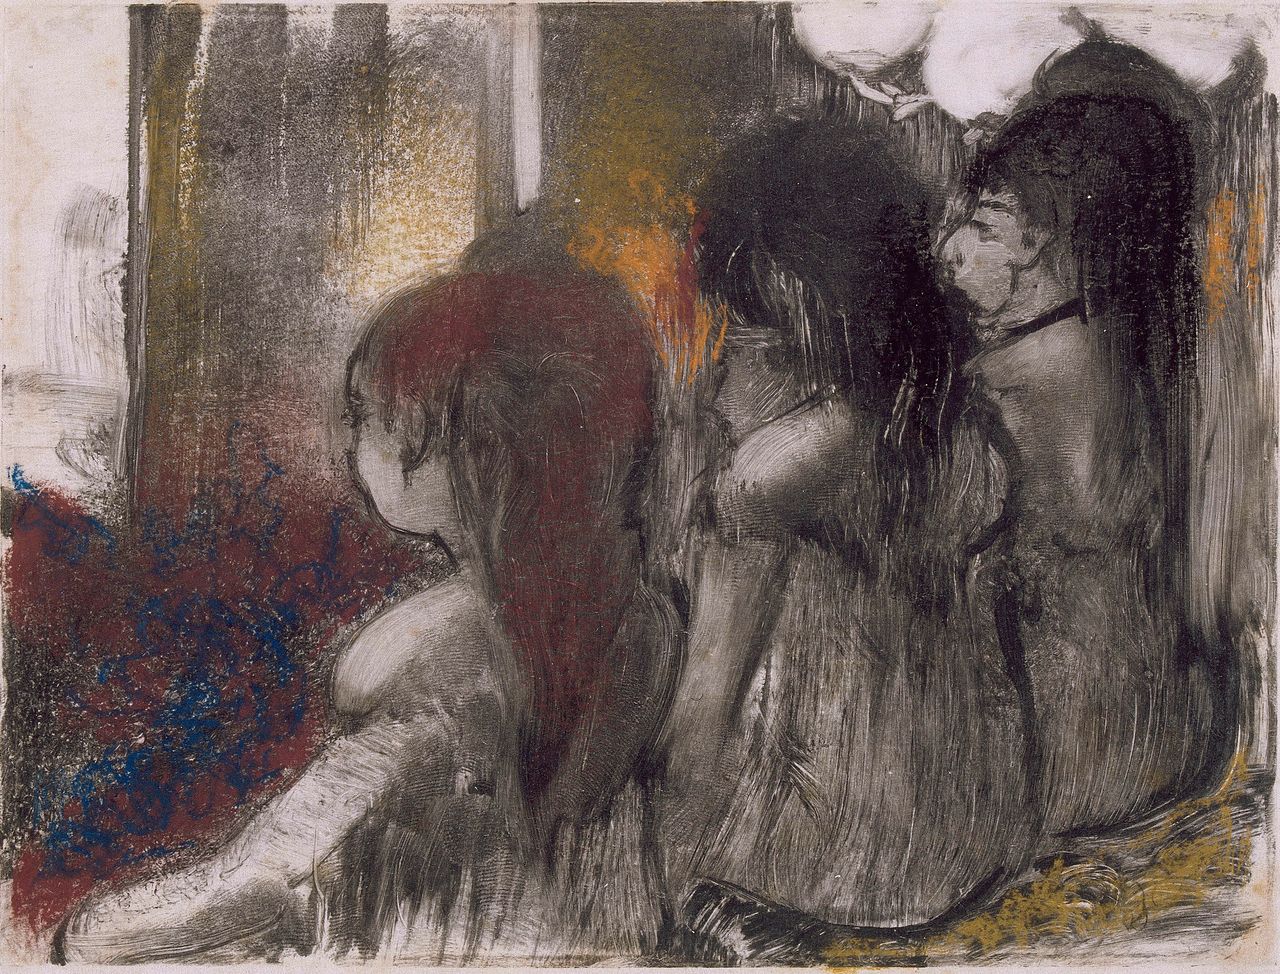 Edgar Degas (French, 1834–1917). <em>Three Women in a Brothel, Seen from Behind (Trois filles assises de dos)</em>, c. 1877–79. Pastel over monotype on paper. 6 5/16 x 8 7/16 in. (16.1 x 21.4 cm). Musée Picasso, Paris.